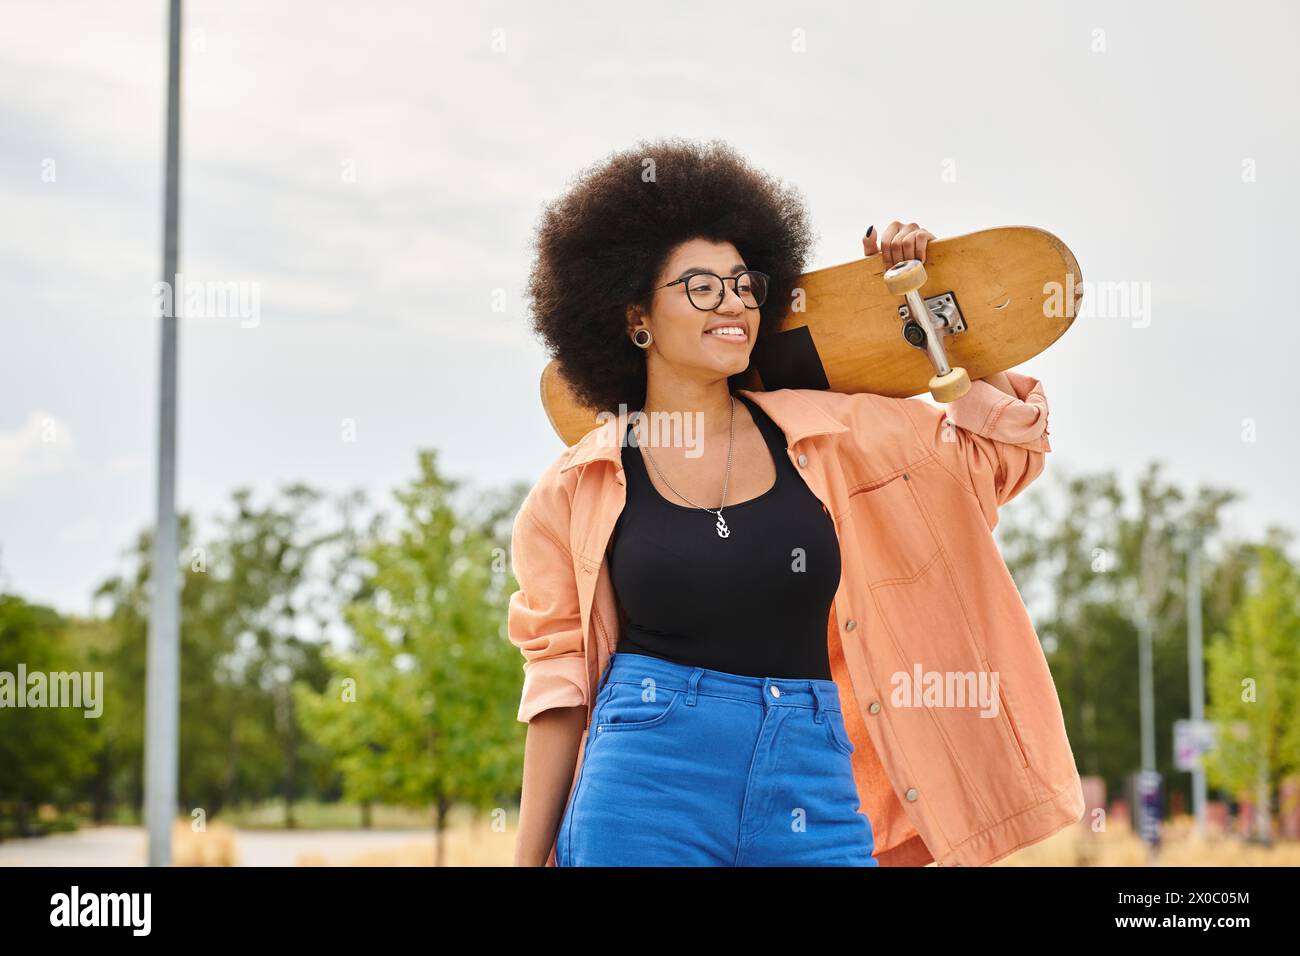 A young African American woman with curly hair holds a skateboard up to her face in a skate park. Stock Photo